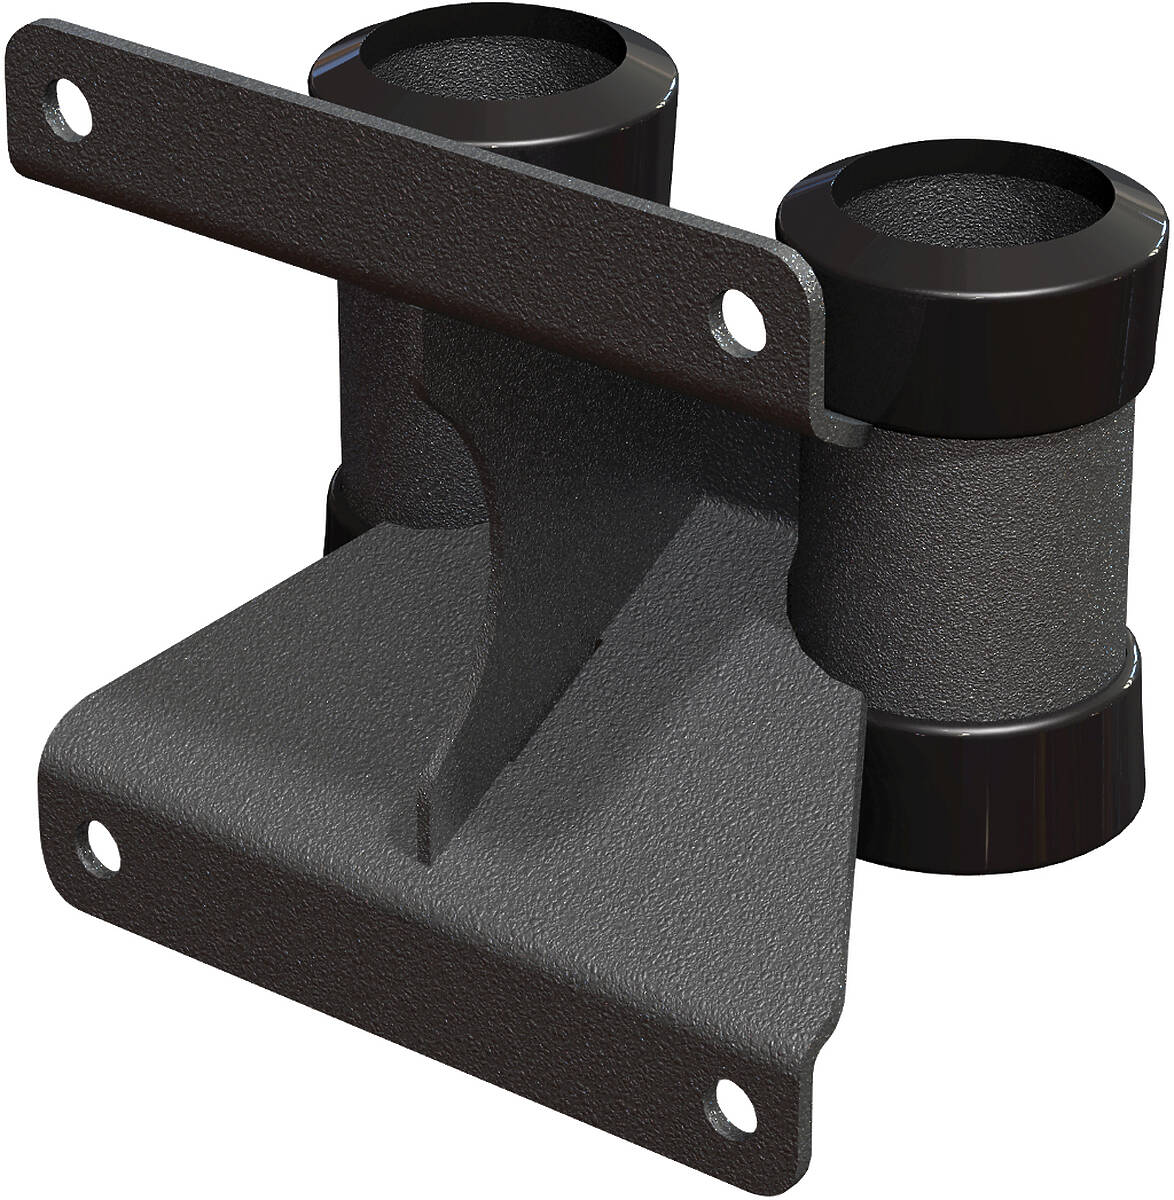 Unicol PS2 Twin Column to mounting bracket adaptor, 110mm column centres product image. Click to enlarge.